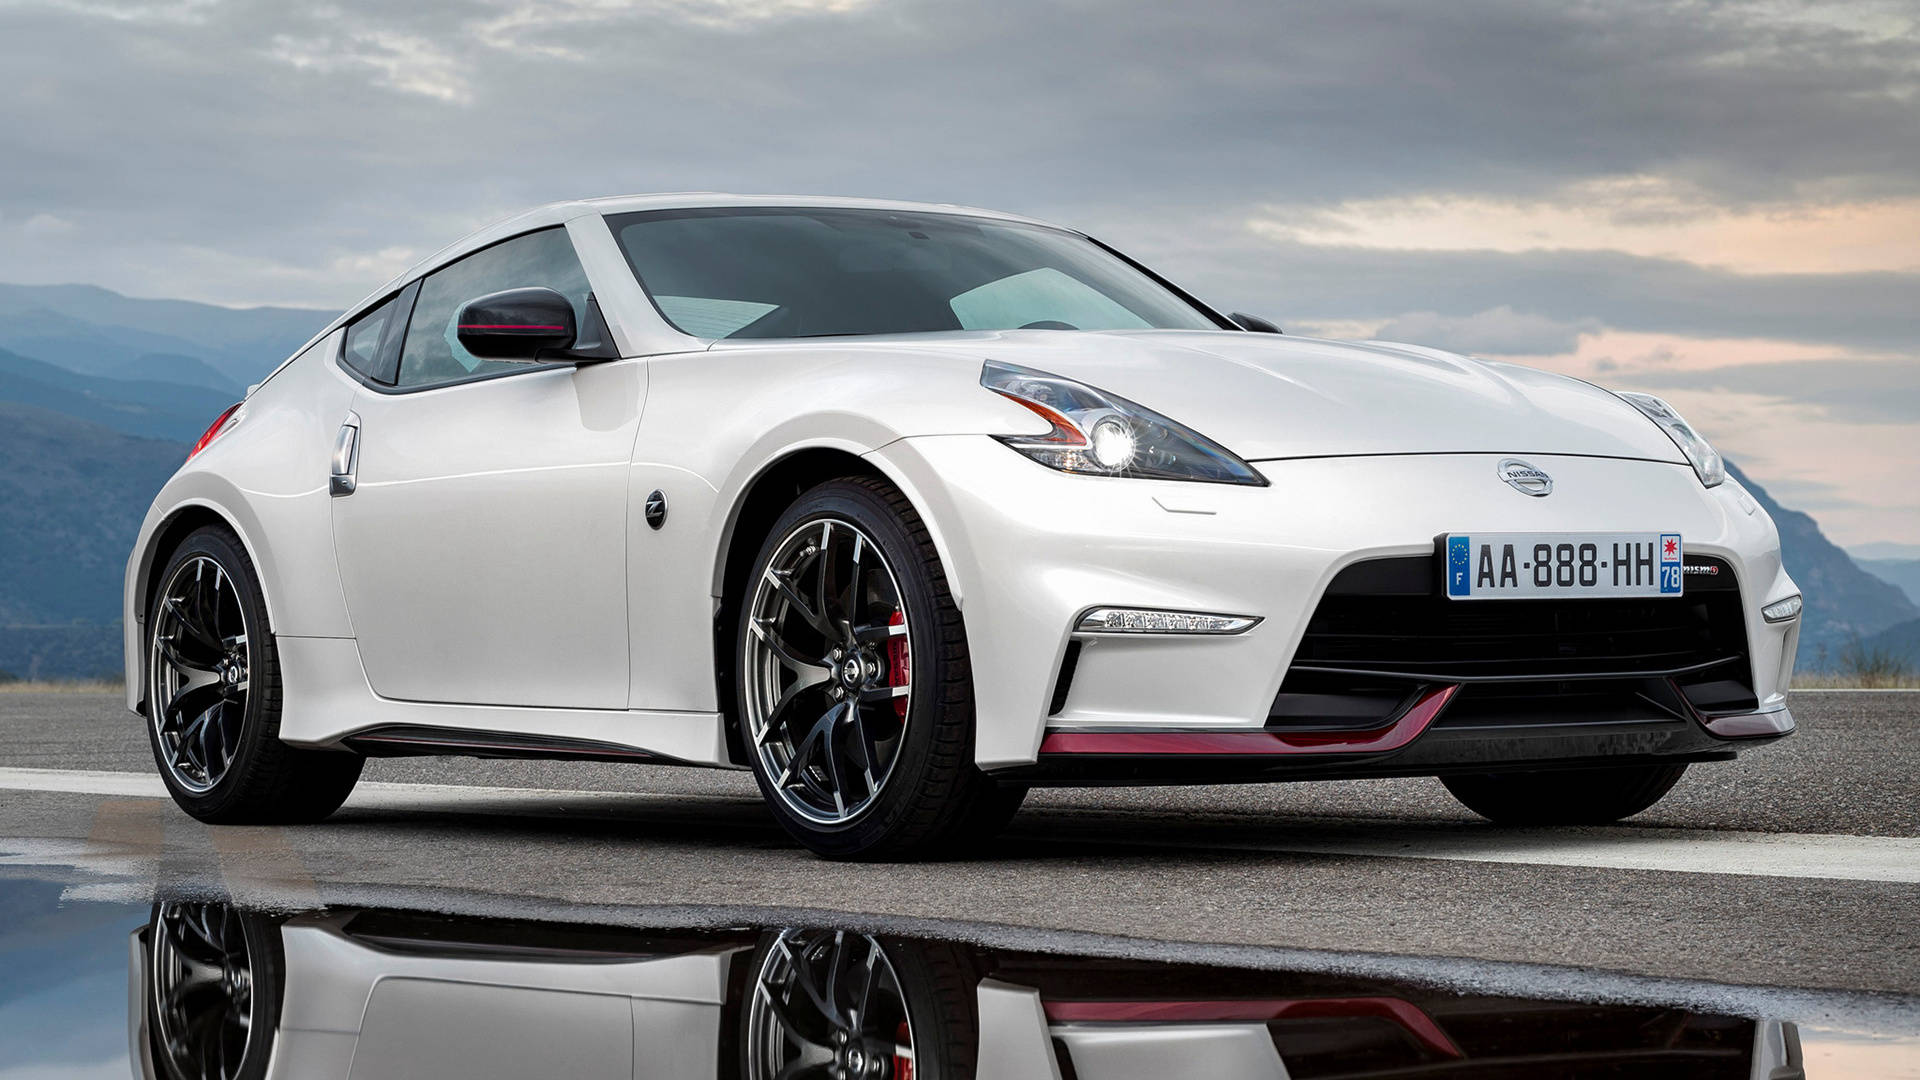 Stunning 2020 Nissan GT-R Nismo in action Wallpaper